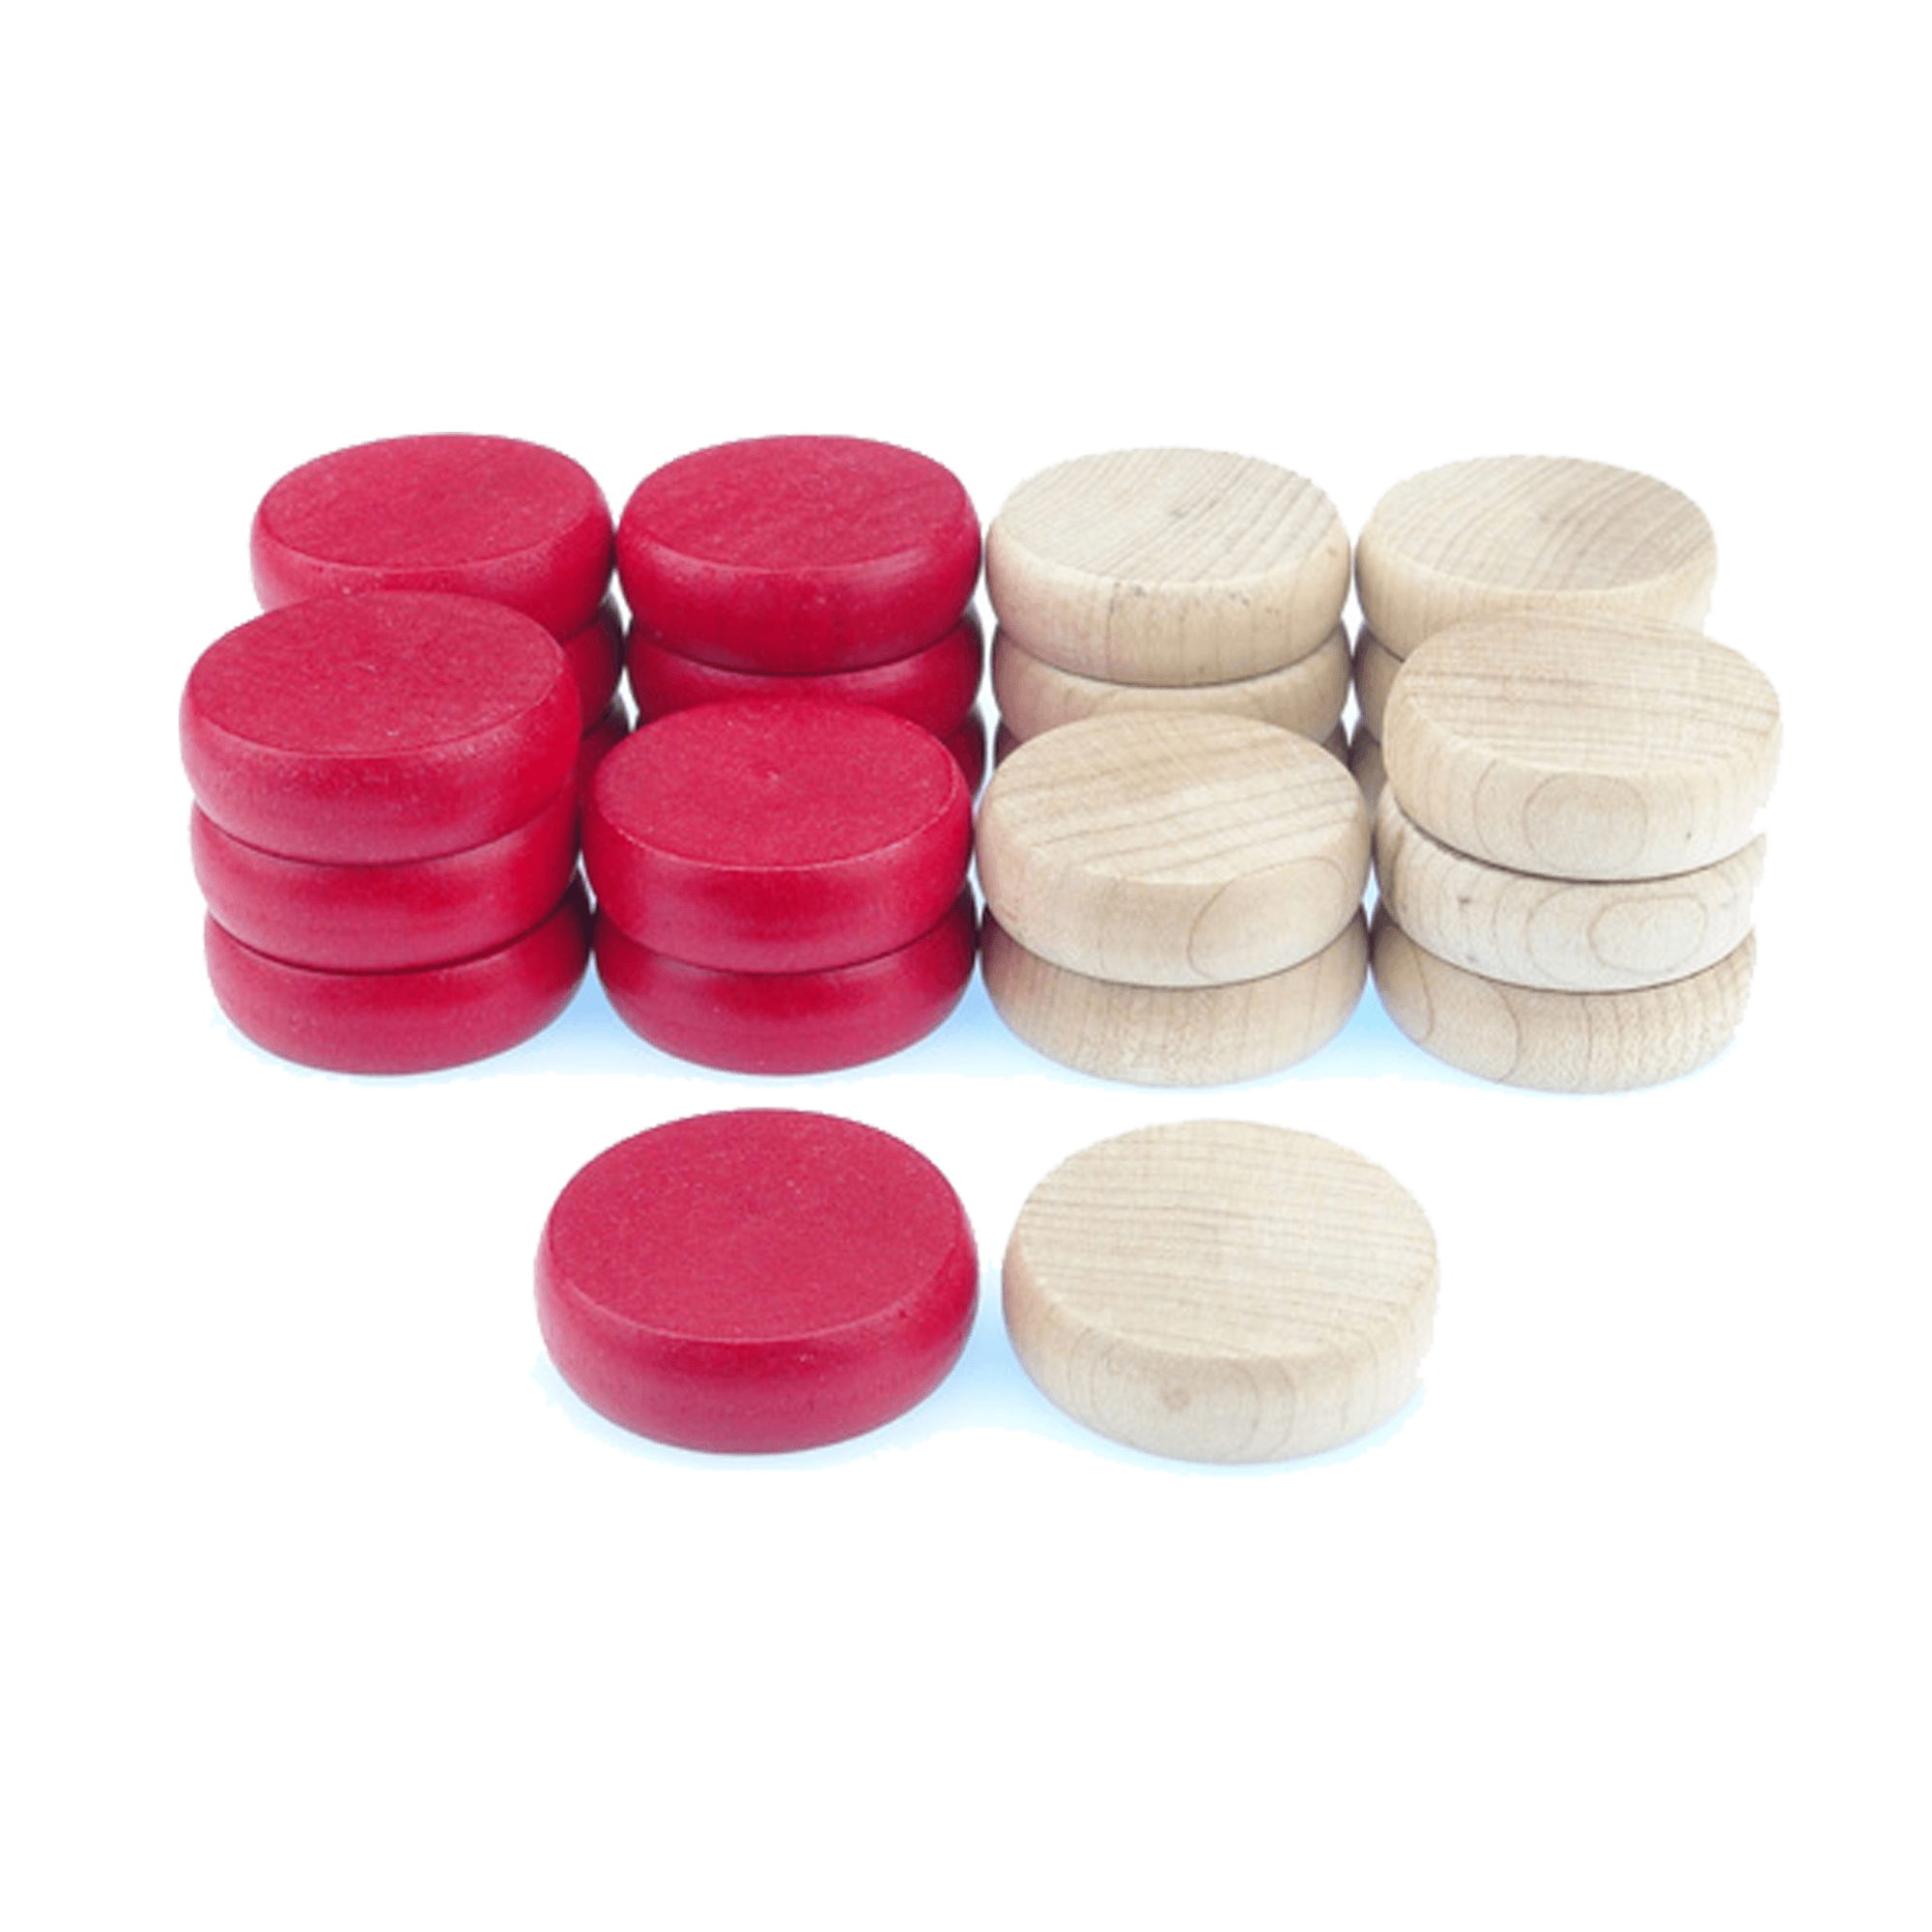 Crokinole Tournament Discs - 13 Red and 13 Wooden - Size 1-1/4" - 24 Needed + 2 Spare Discs - Bag Included - Carrom Alternative